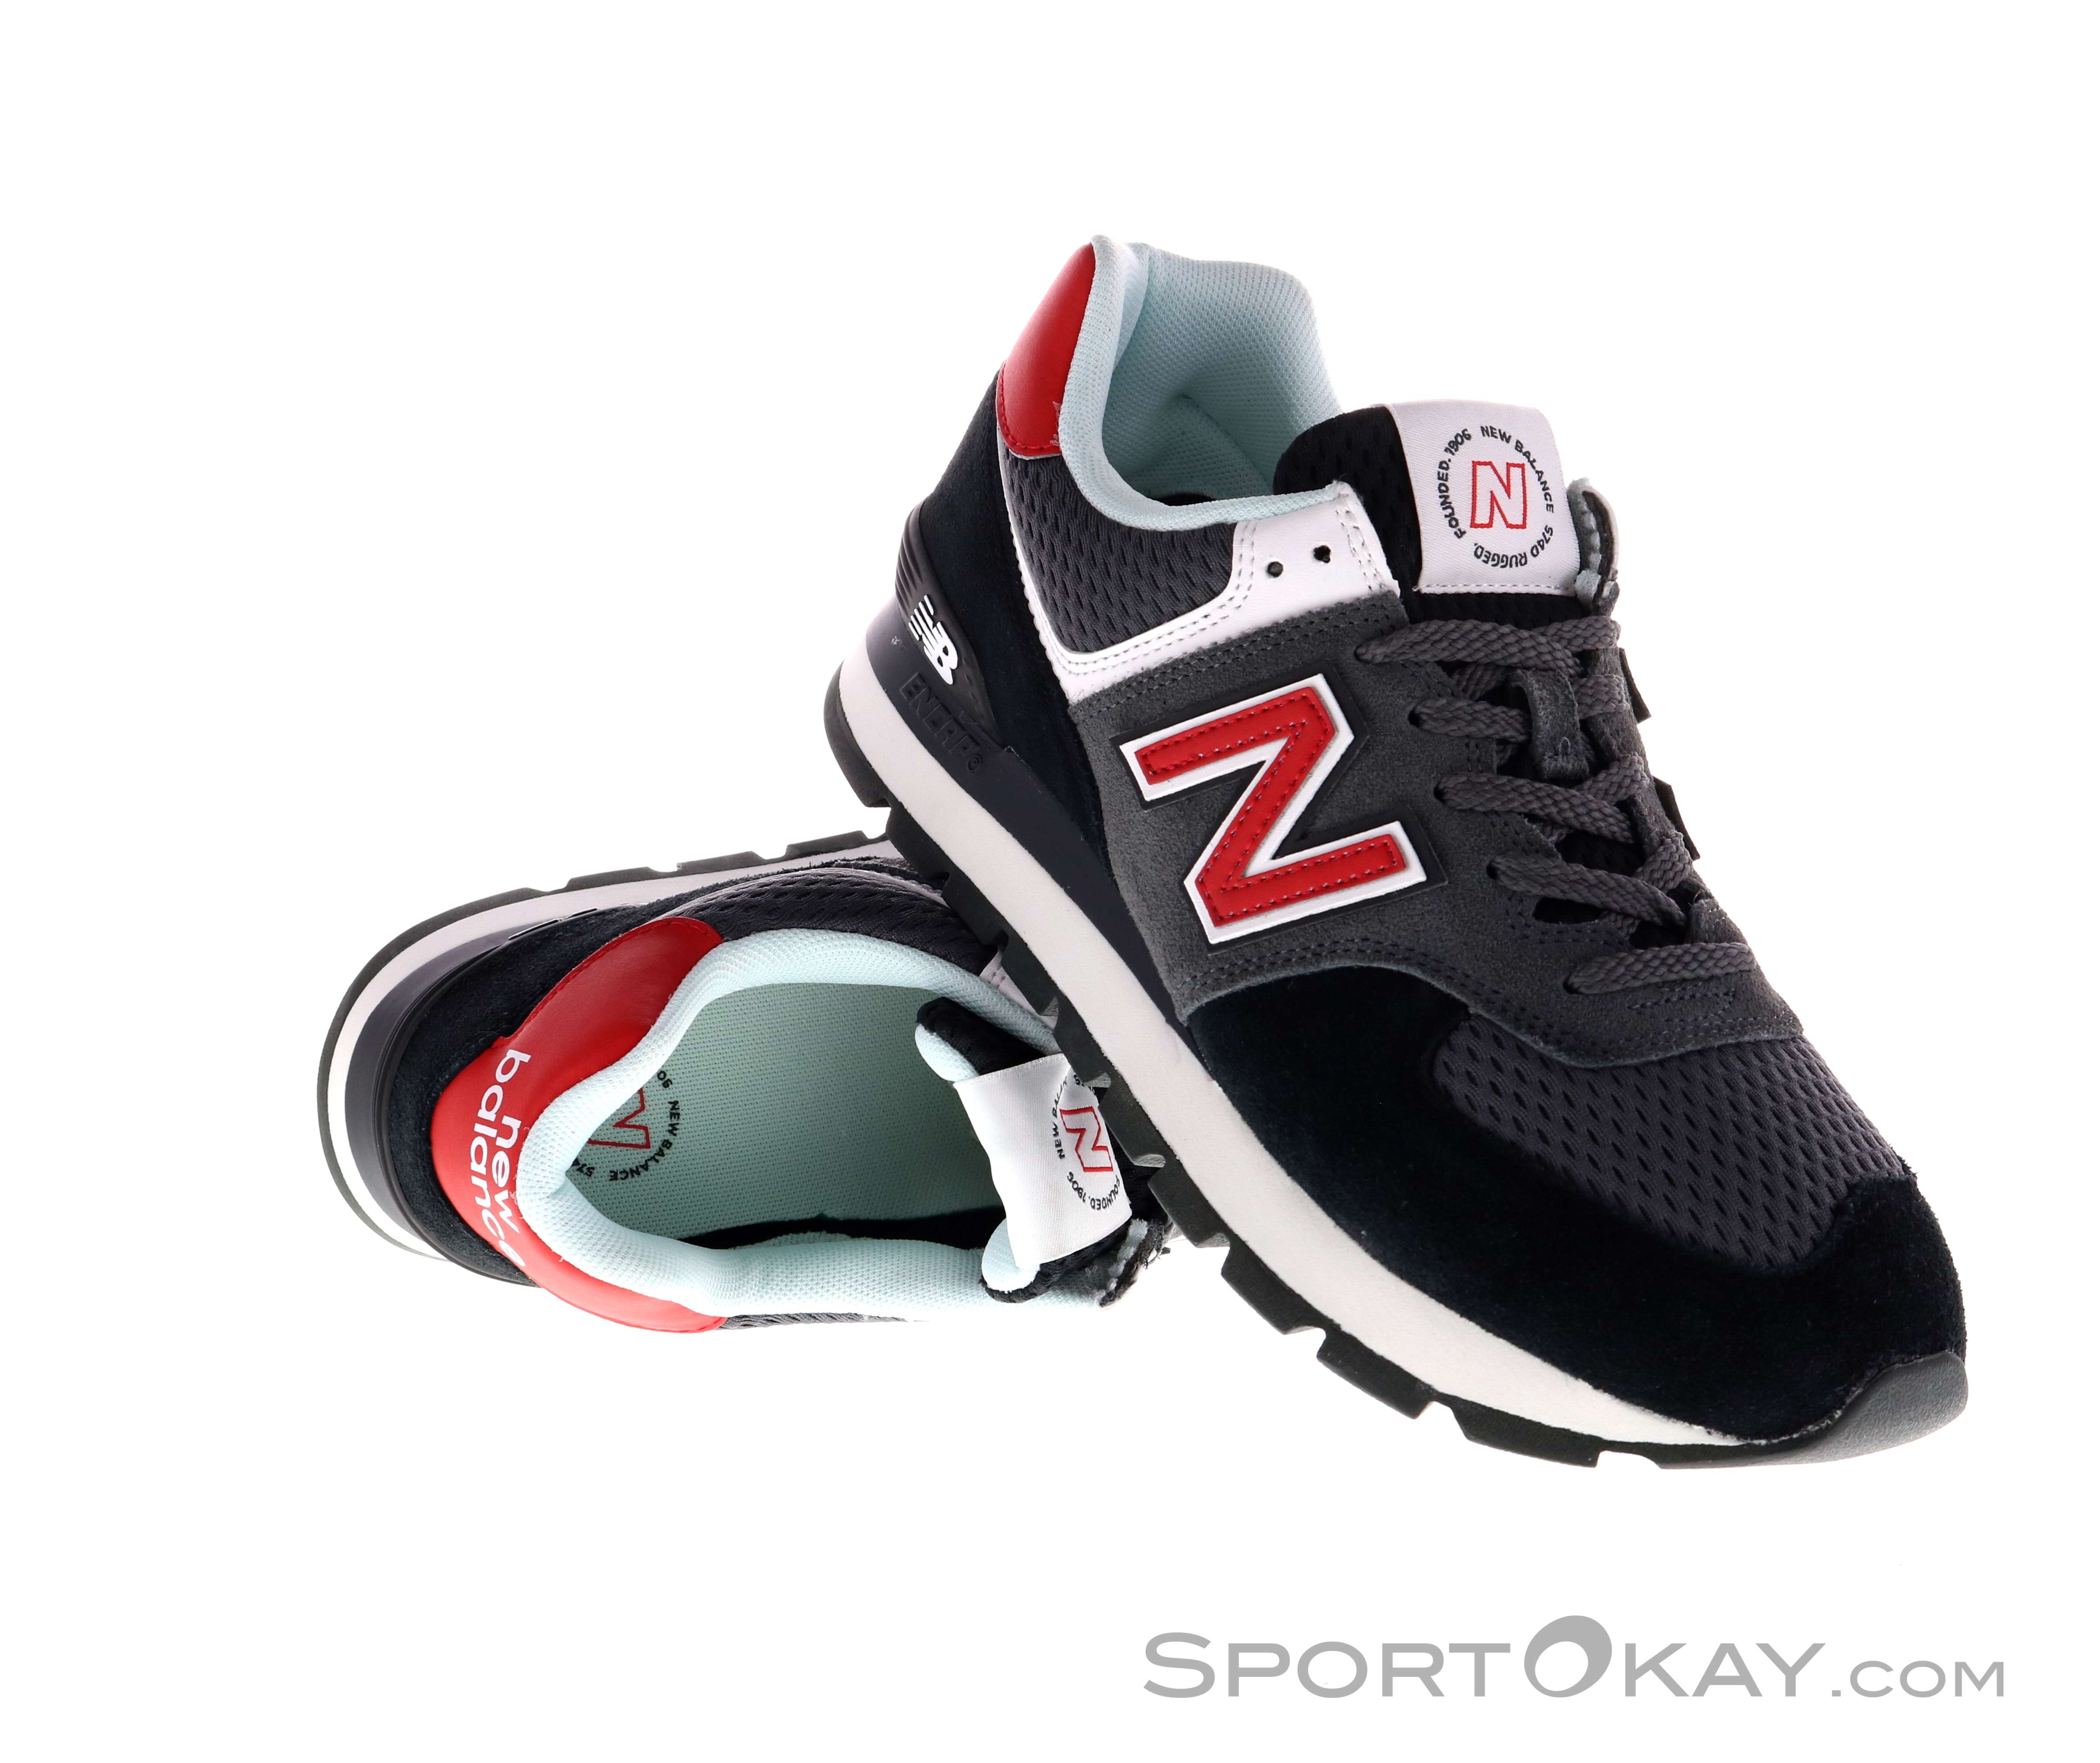 New Balance 574 Trainers In Black for Men